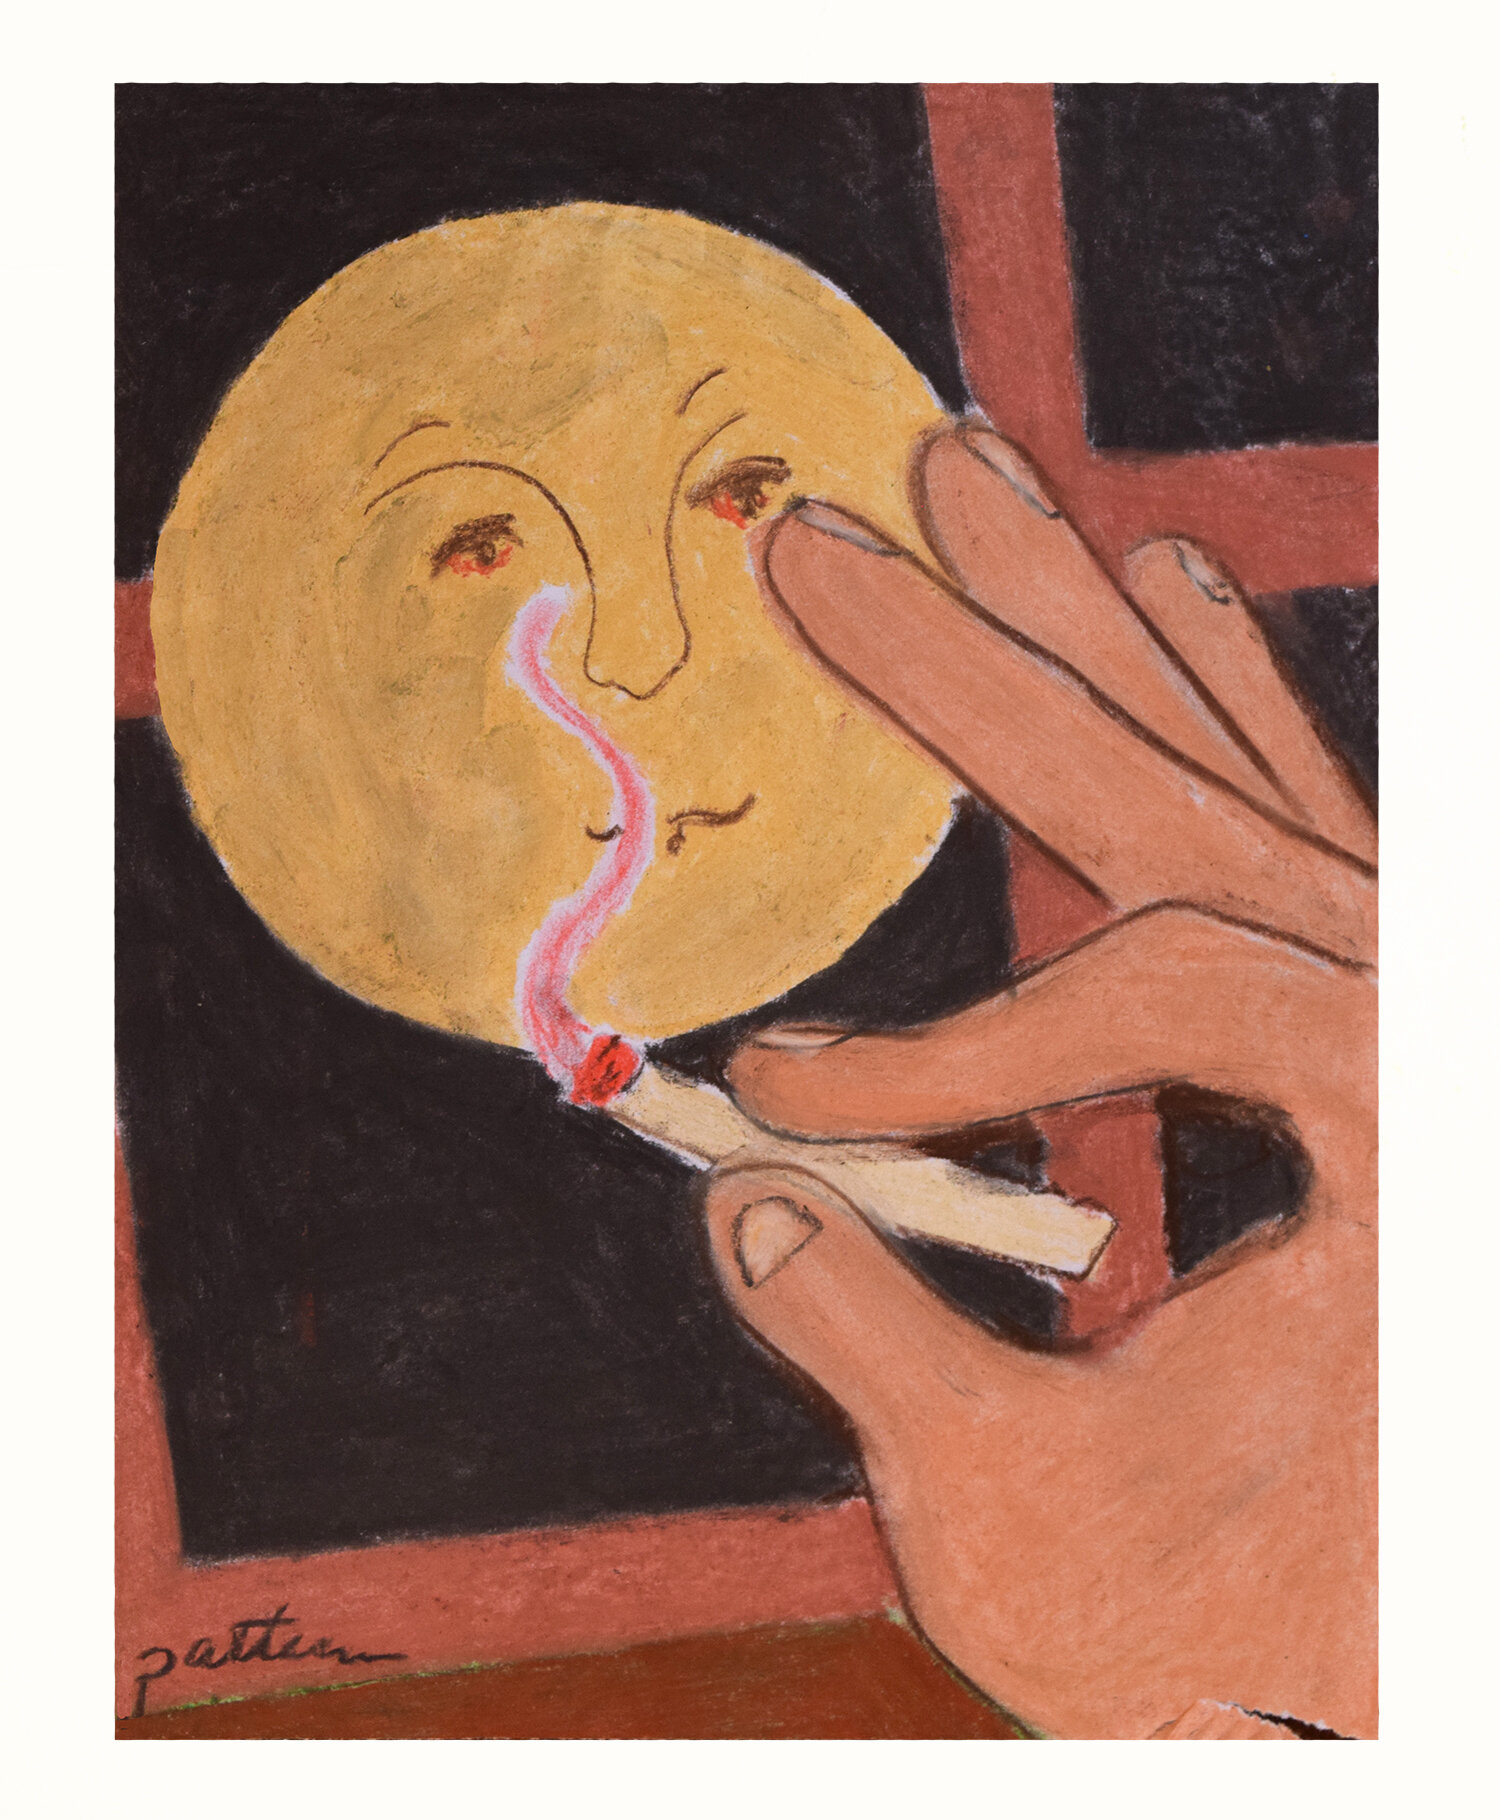 Contact High, 2019, dry pastel on paper, 8.5 x 11 in.